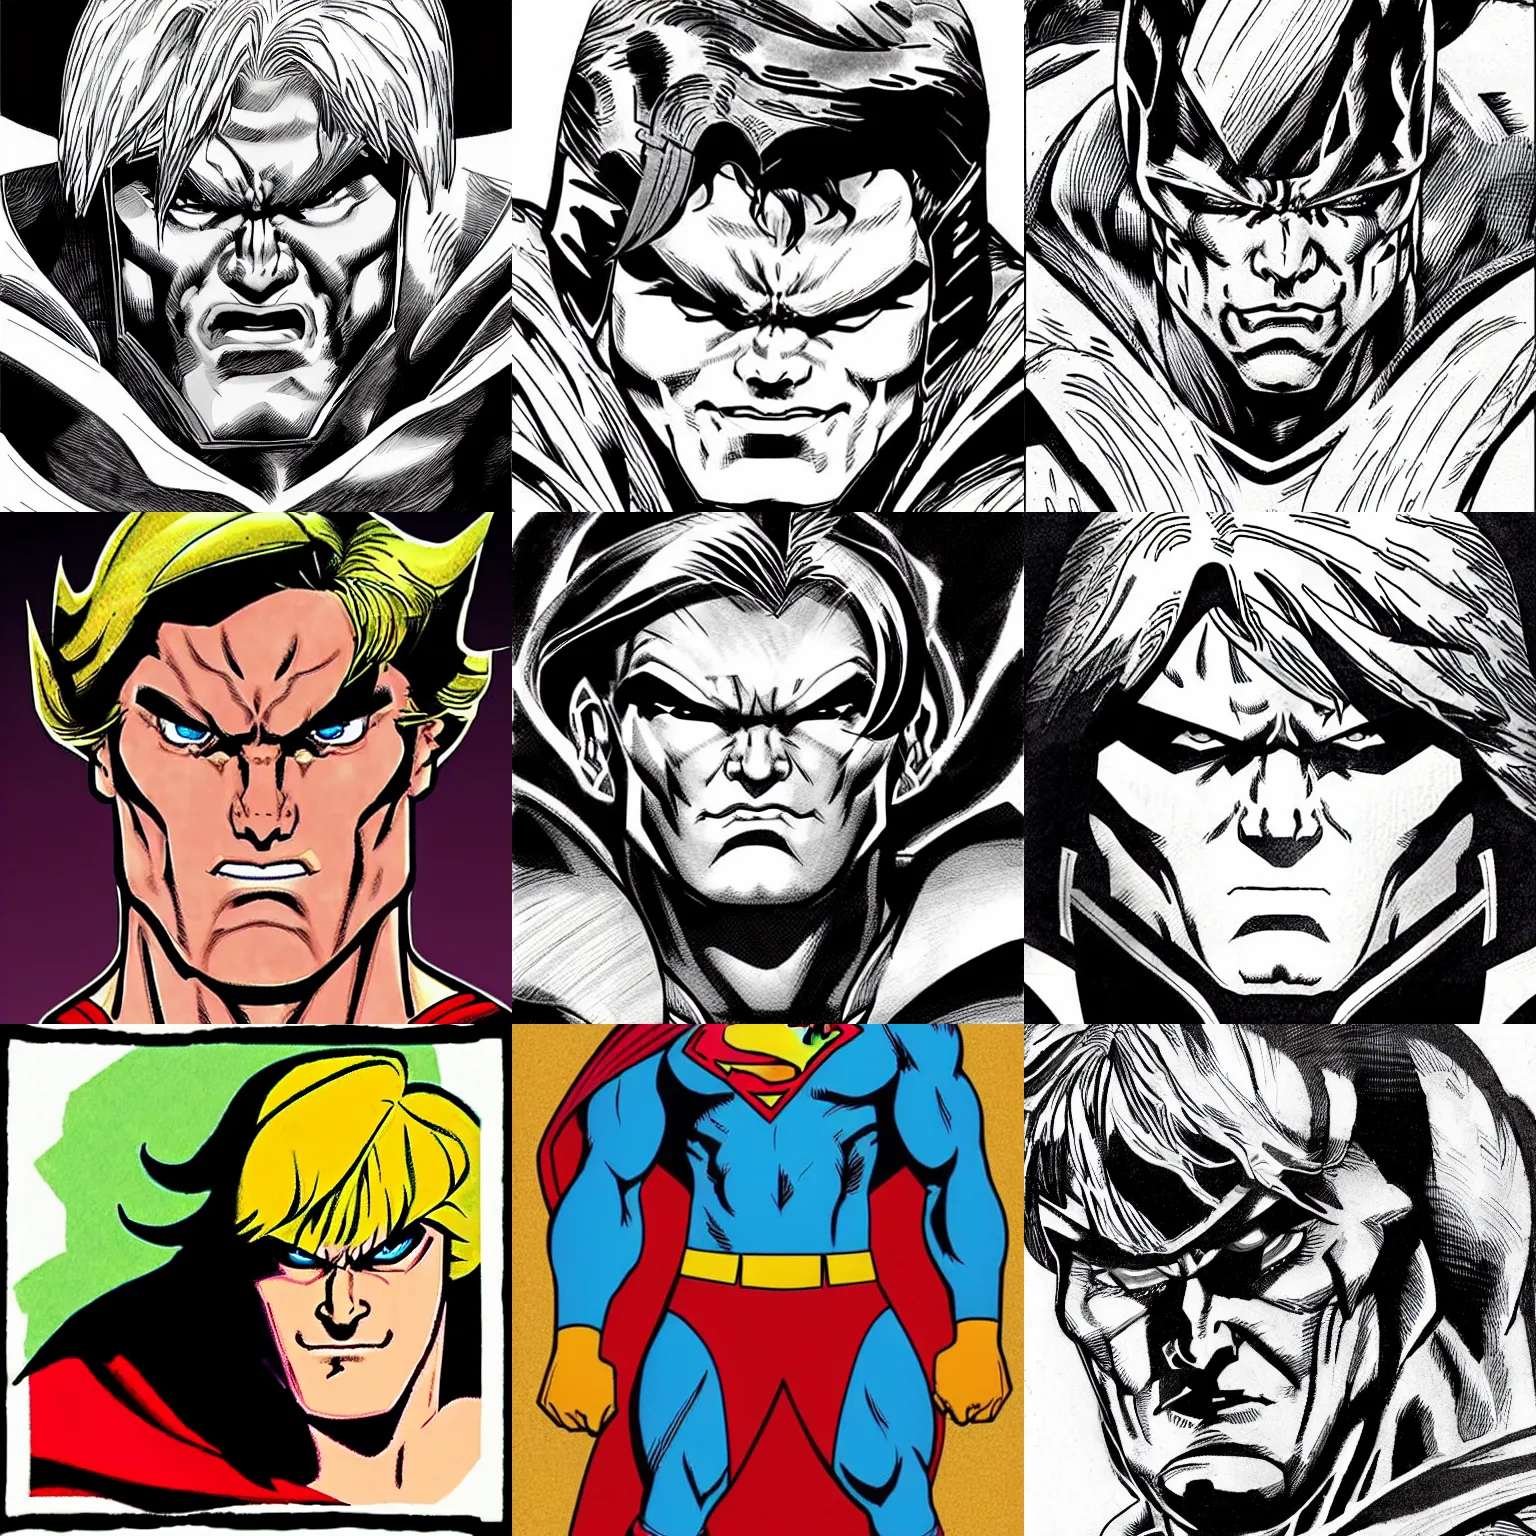 Prompt: he - man!!! jim lee!!! macro face calm!! shot!! flat ink sketch by jim lee face close up headshot superman costume in the style of jim lee, x - men superhero comic book character by jim lee